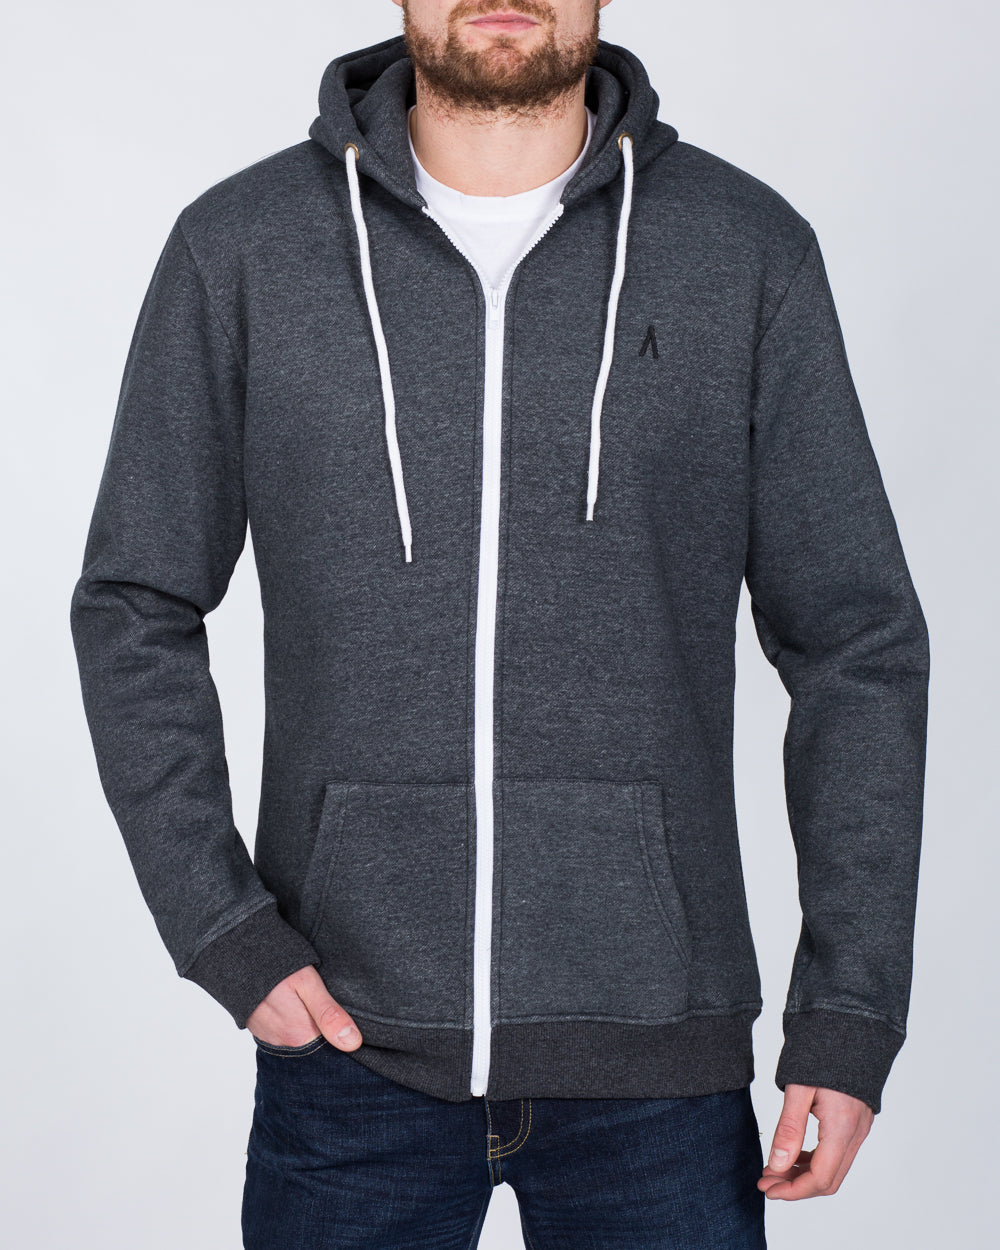 2t Zip Up Tall Hoodie (charcoal)